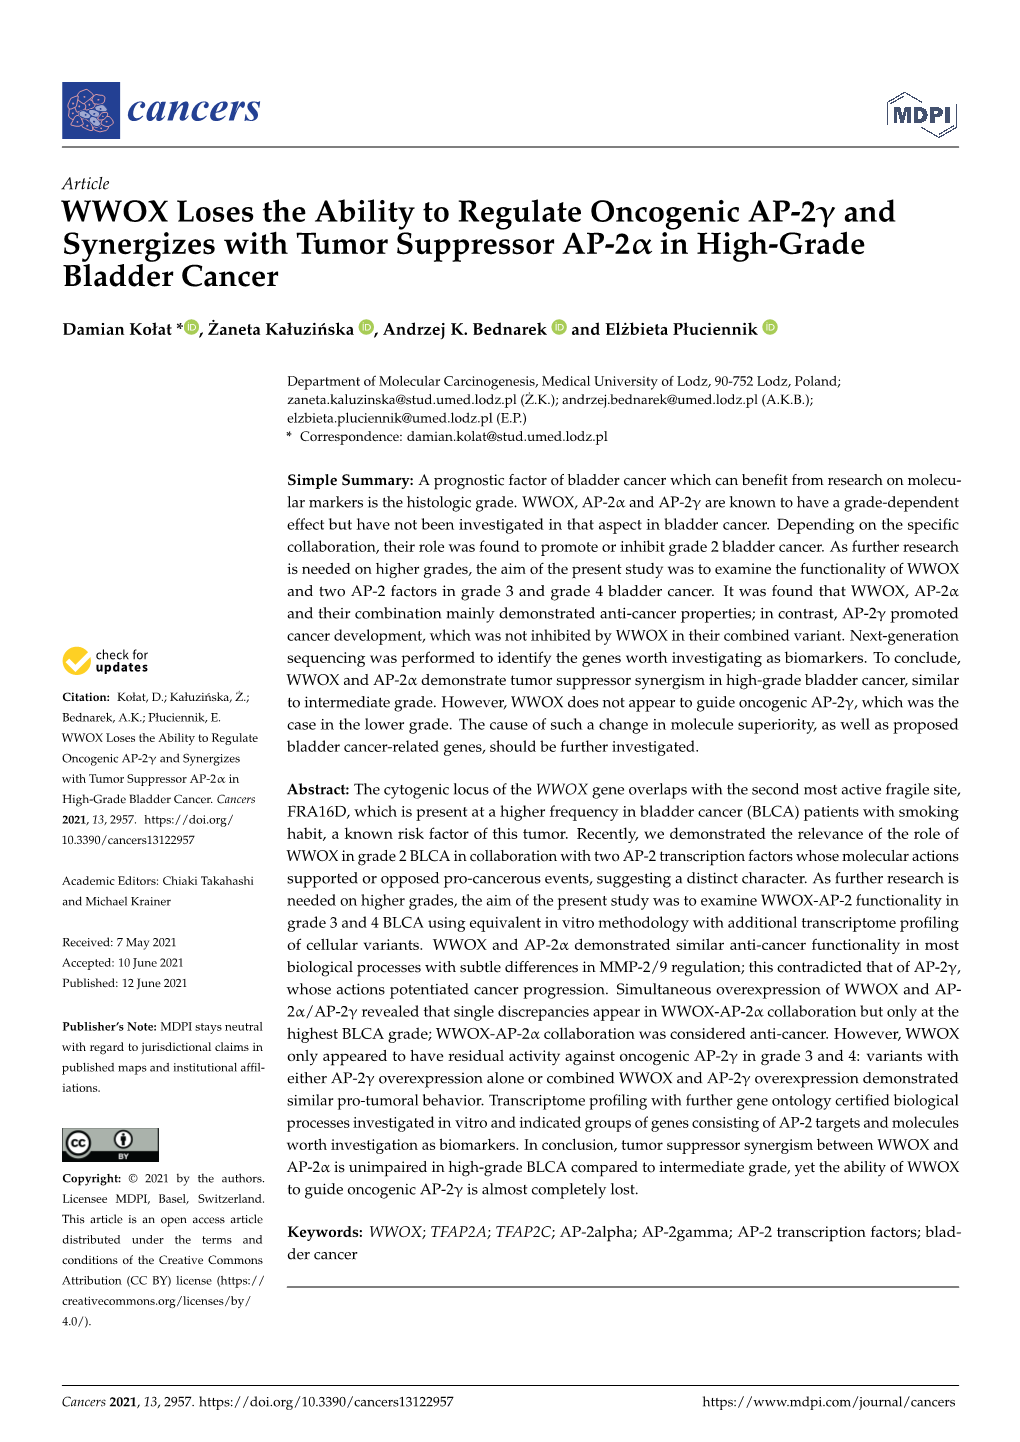 WWOX Loses the Ability to Regulate Oncogenic AP-2Γ and Synergizes with Tumor Suppressor AP-2Α in High-Grade Bladder Cancer